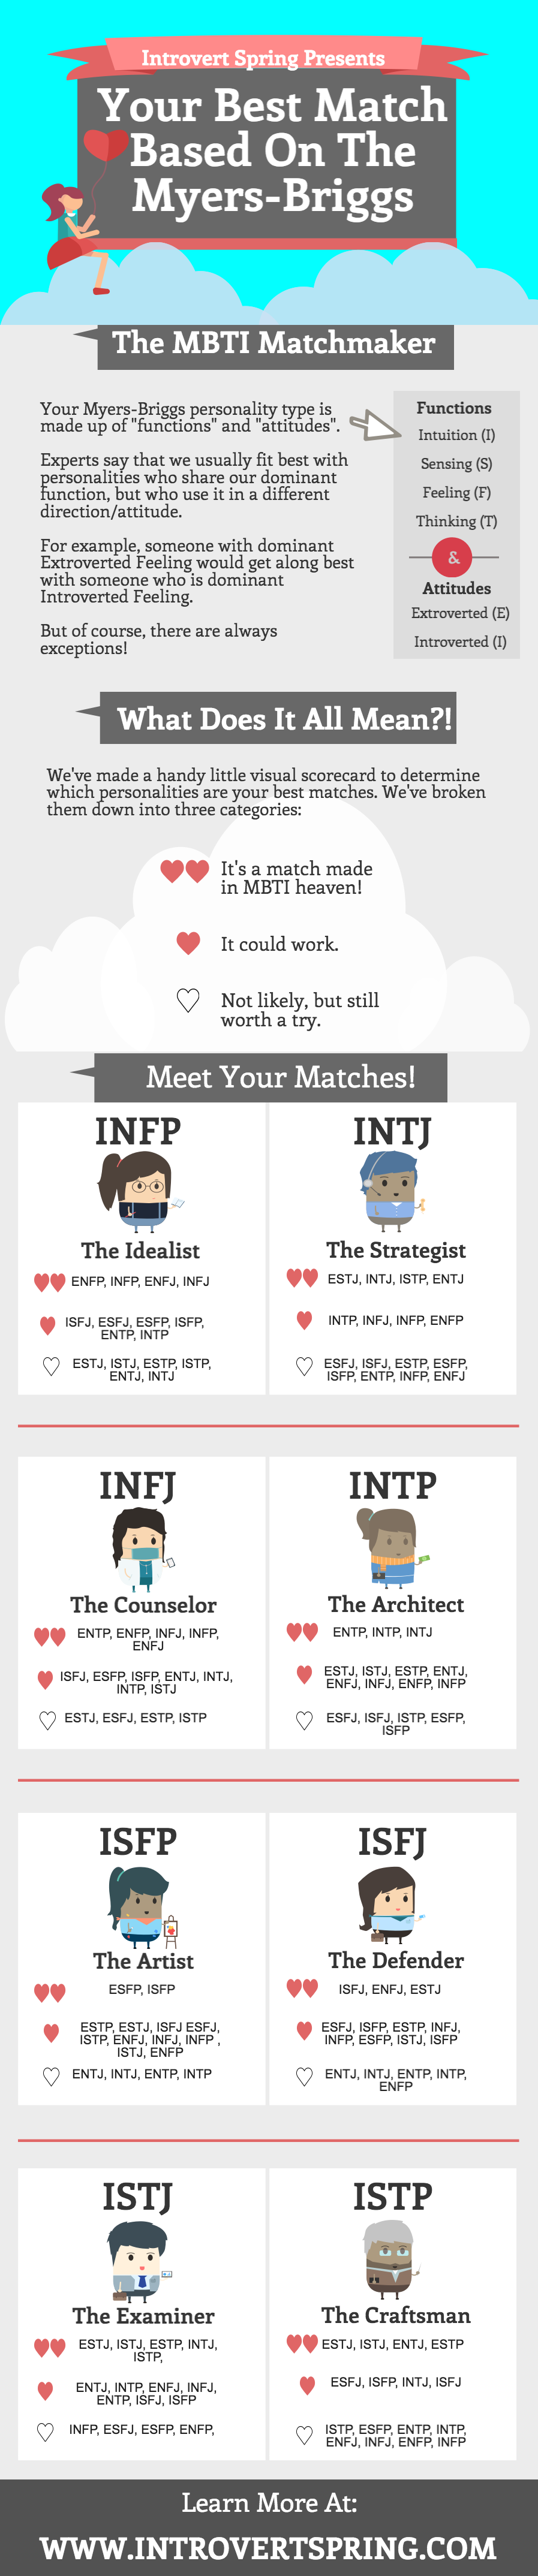 enfp dating isfj